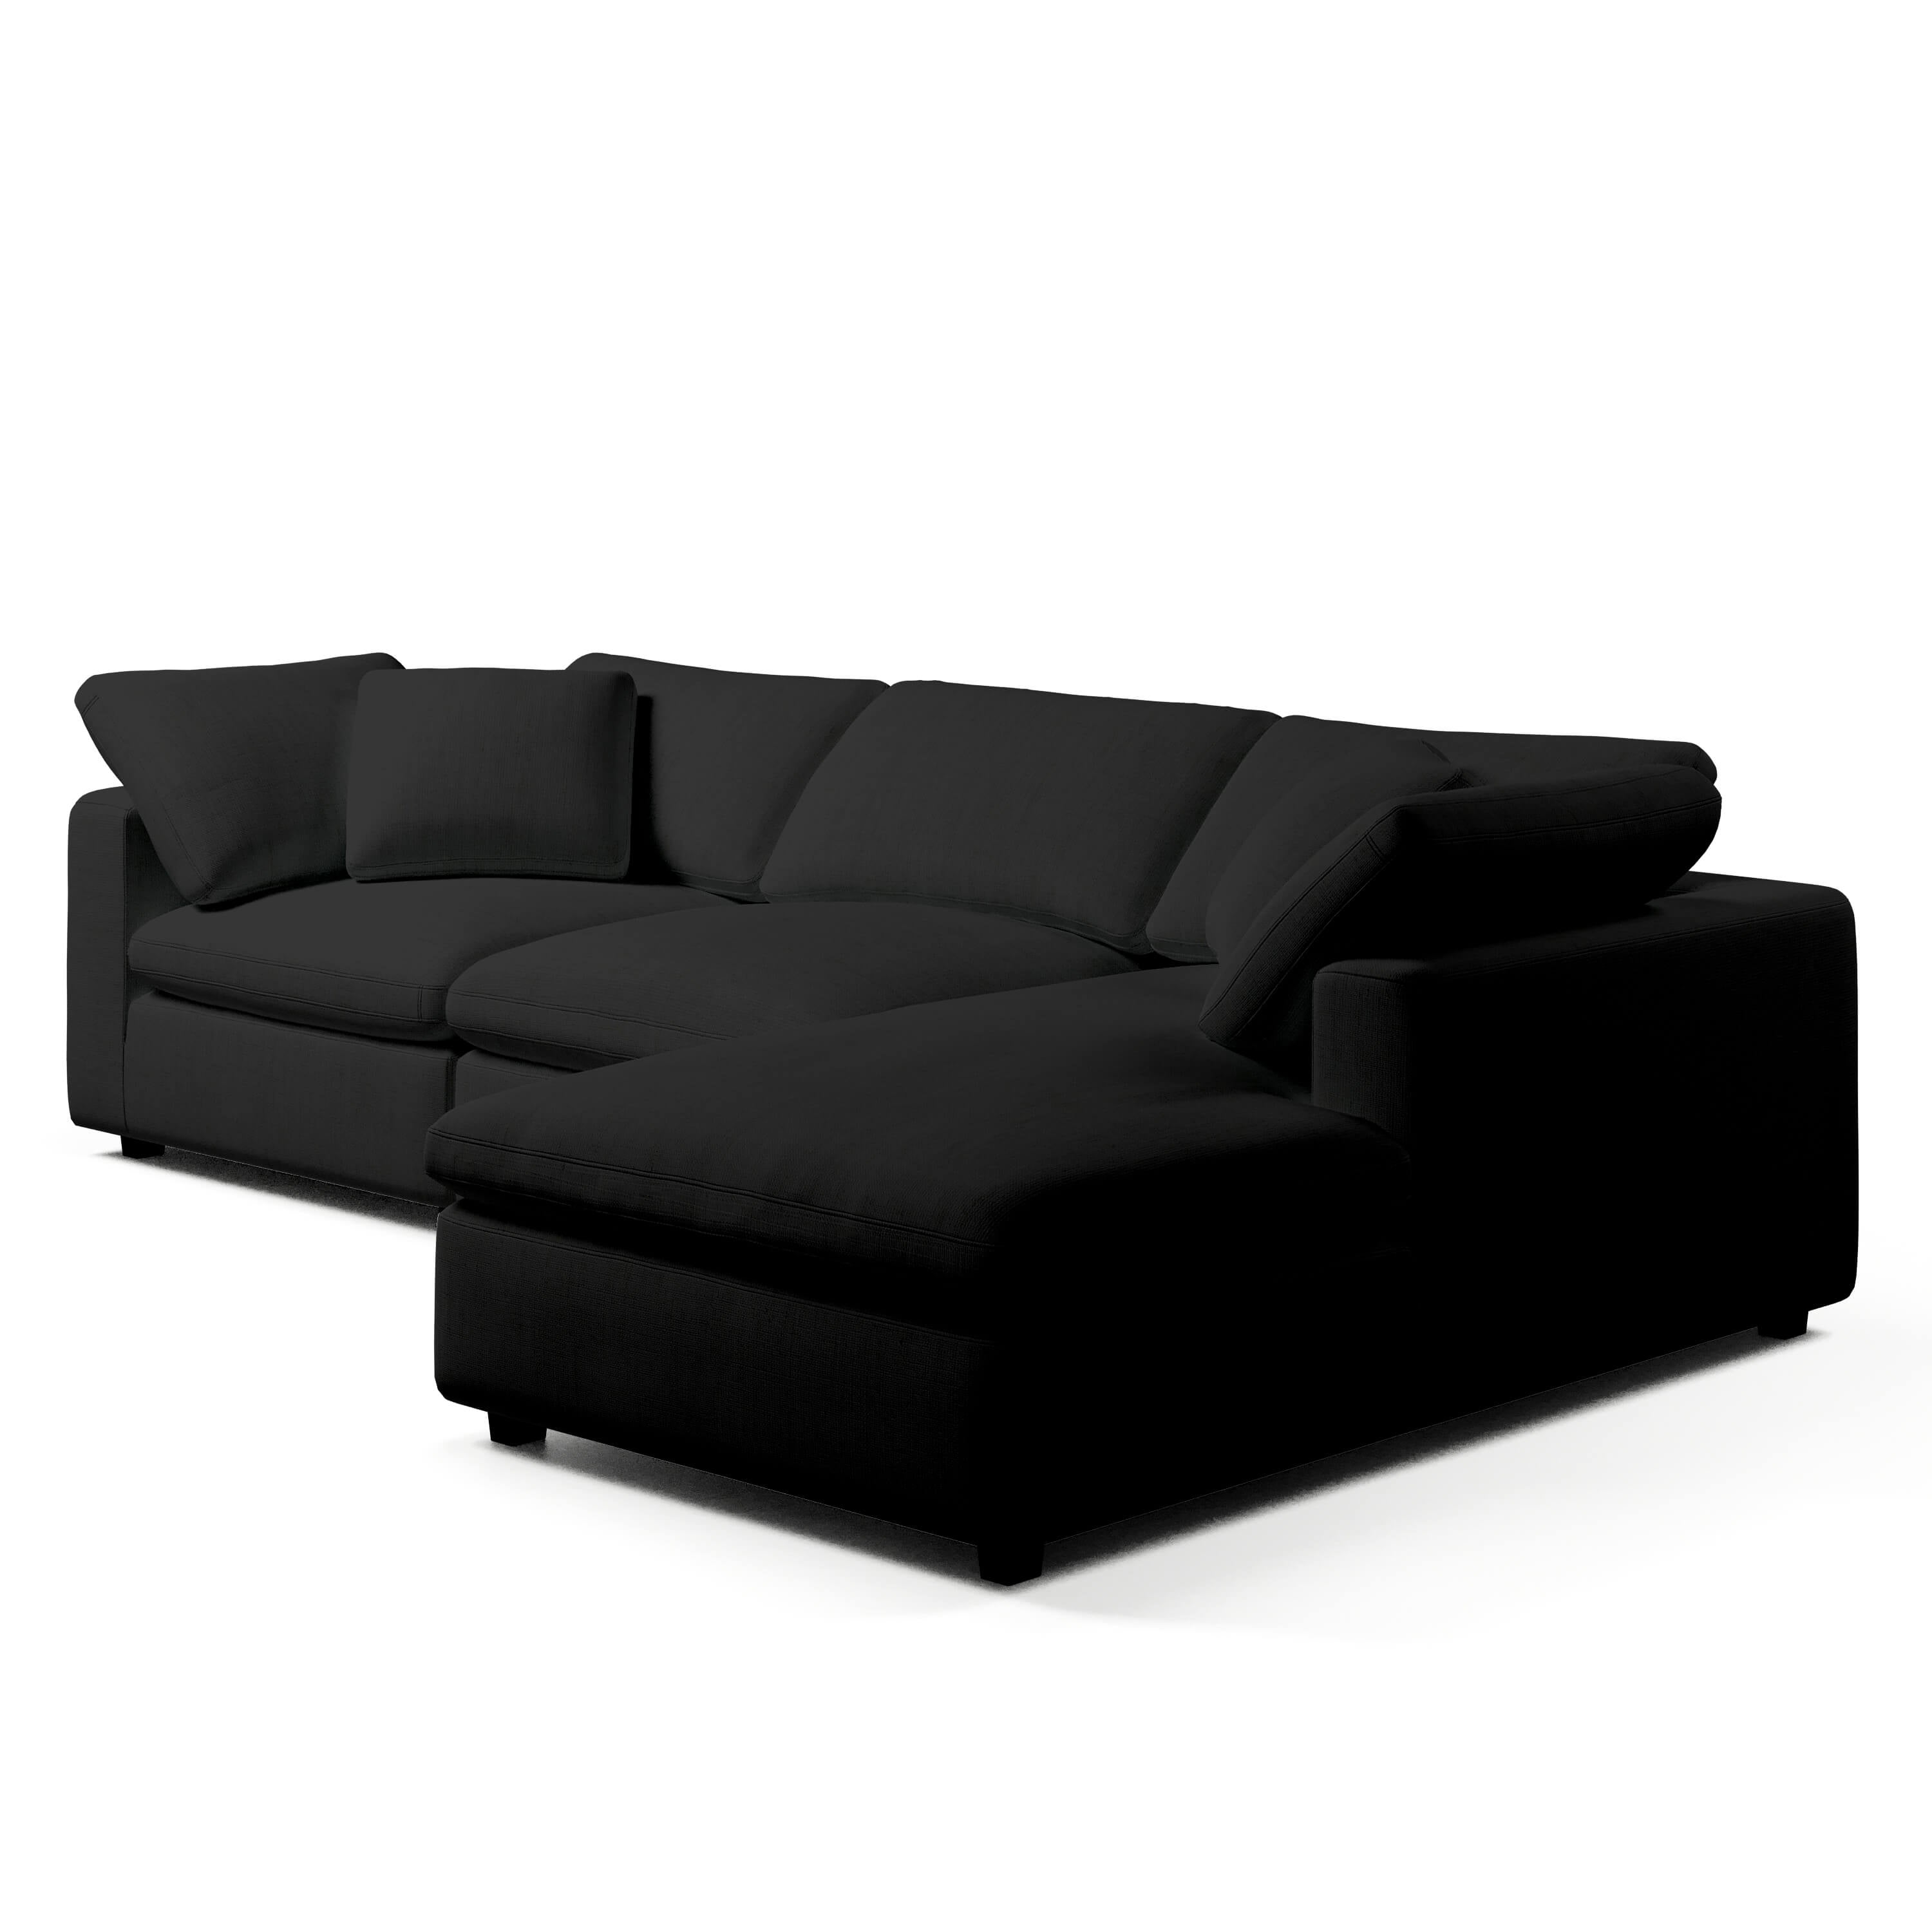 Comfy Modular Sofa - 3-Seater Chaise - Right Hand Facing